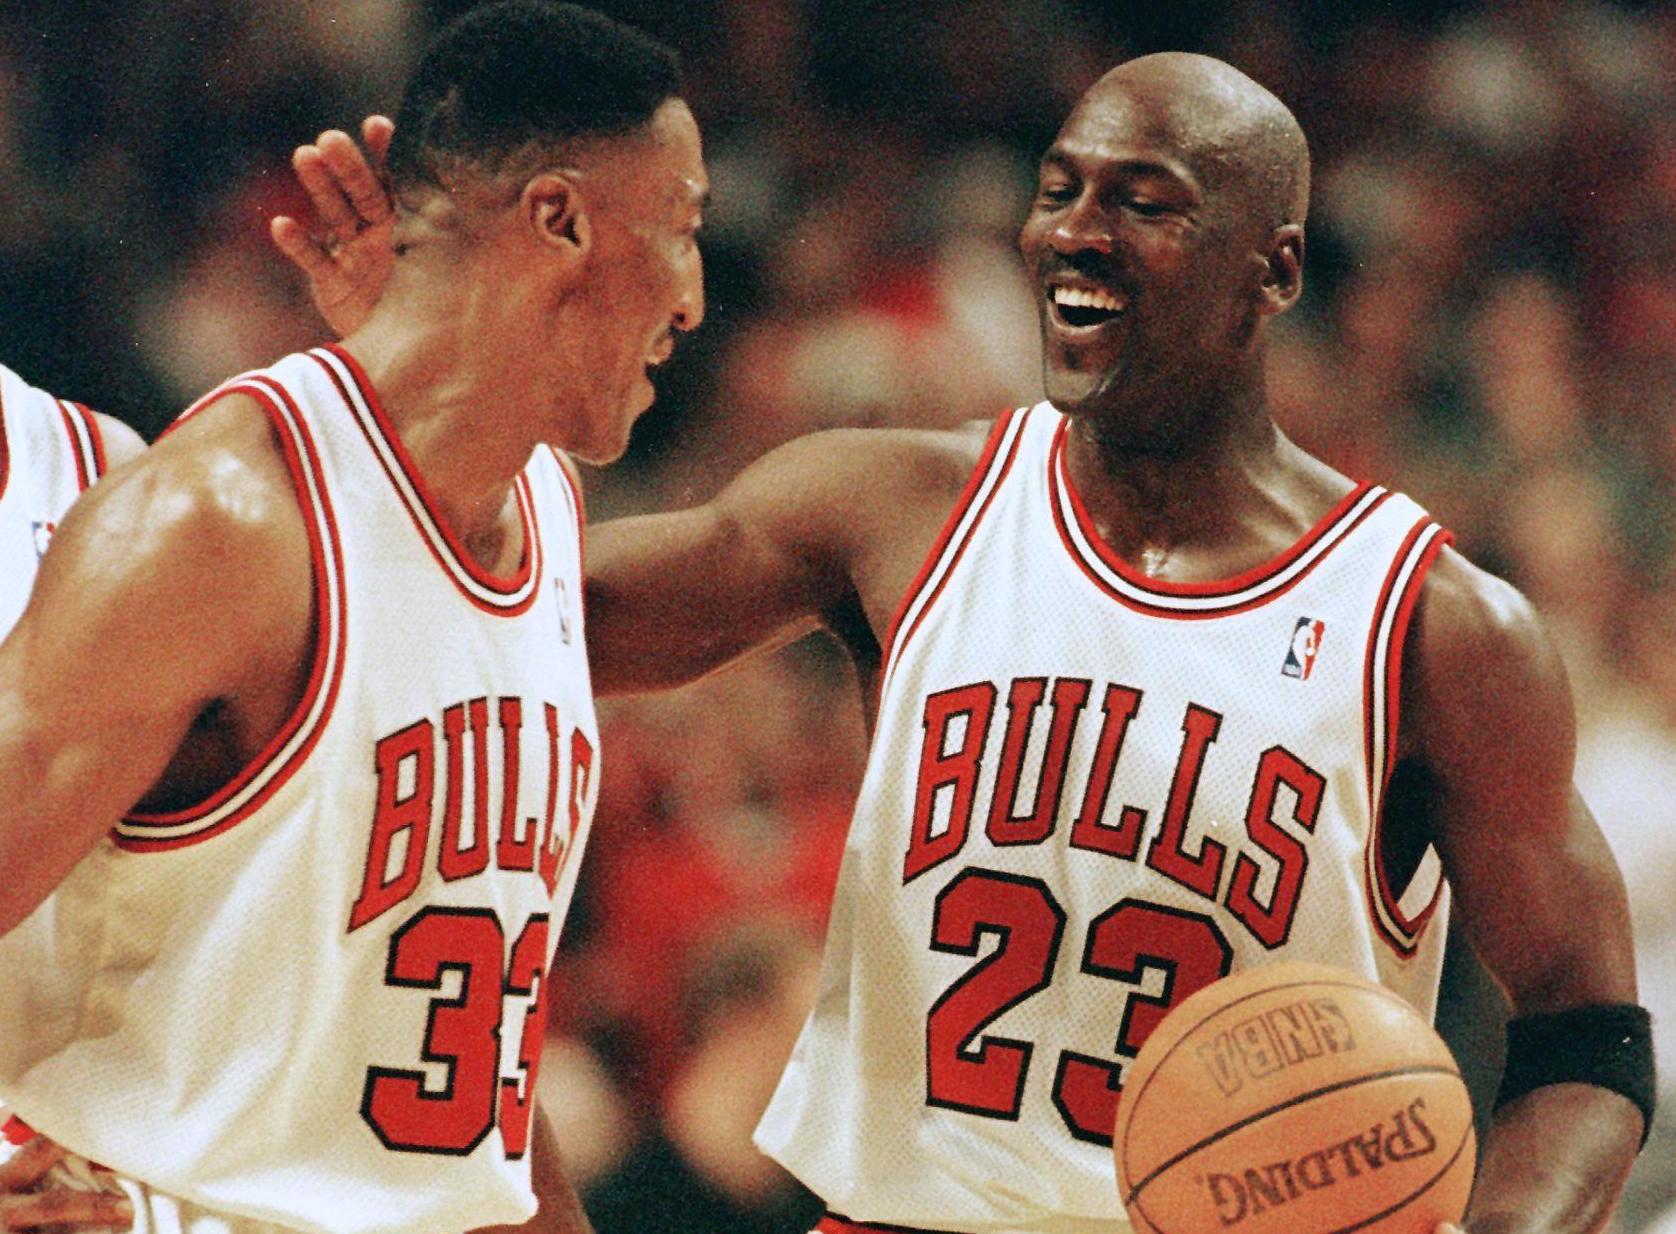 How to watch The Last Dance Chicago Bulls documentary Episode 9 and 10 time, TV channel, series finale online live stream (5/17/2020)